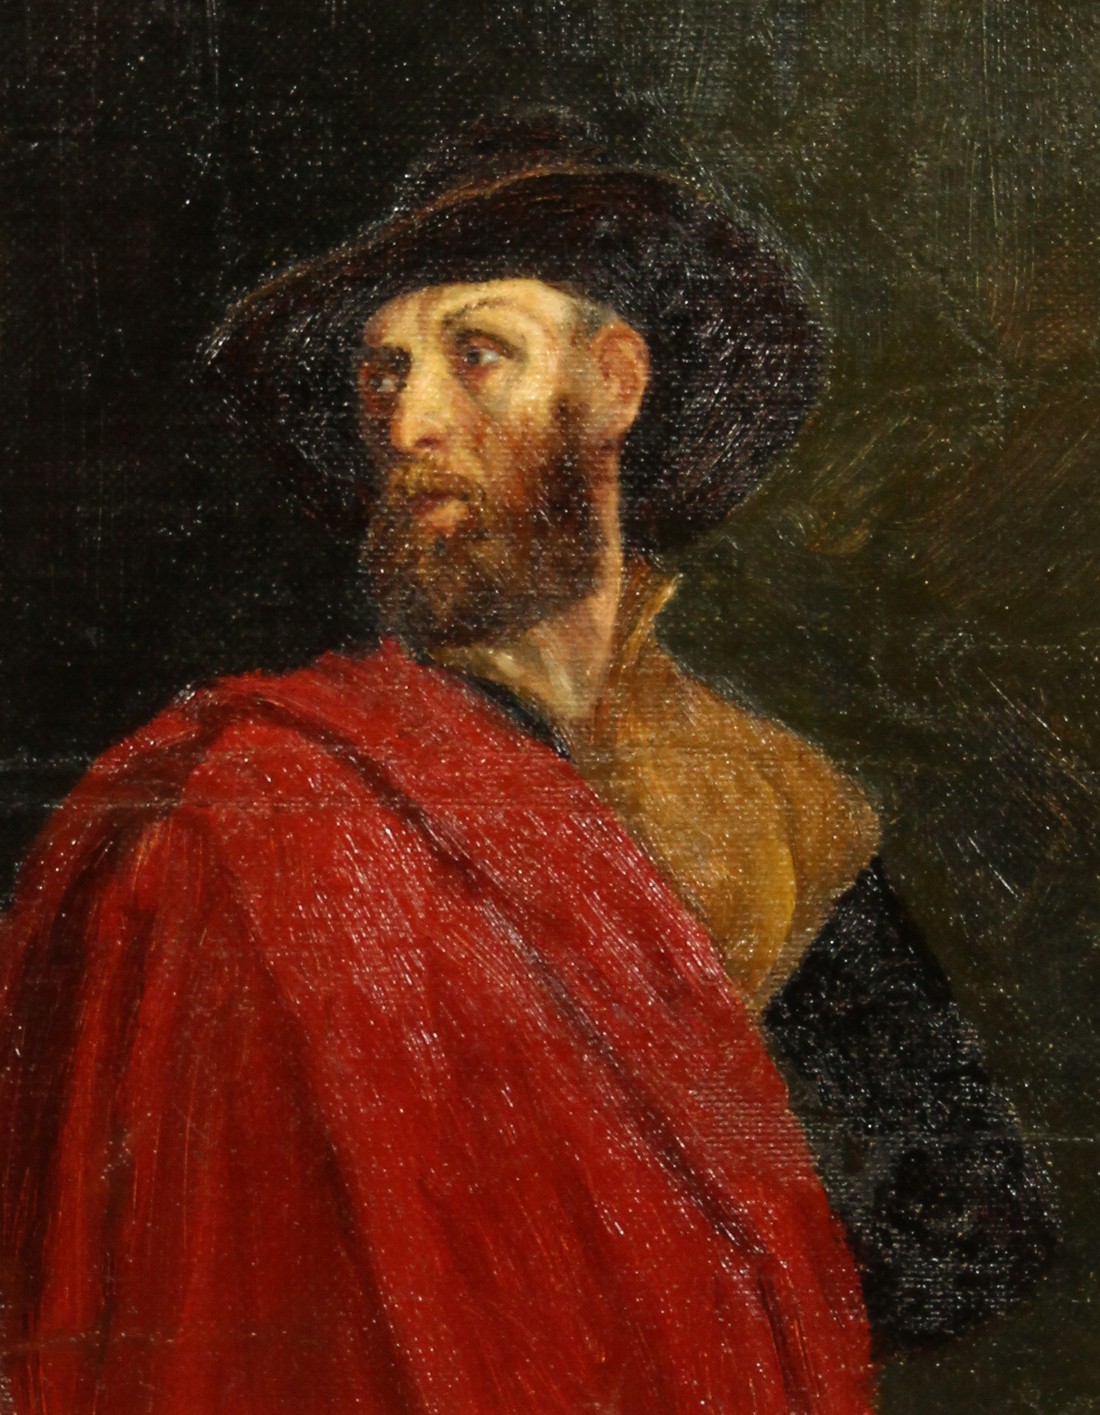 19th/20th Century English School, A portrait of a gentleman with a red cloak, oil on canvas laid